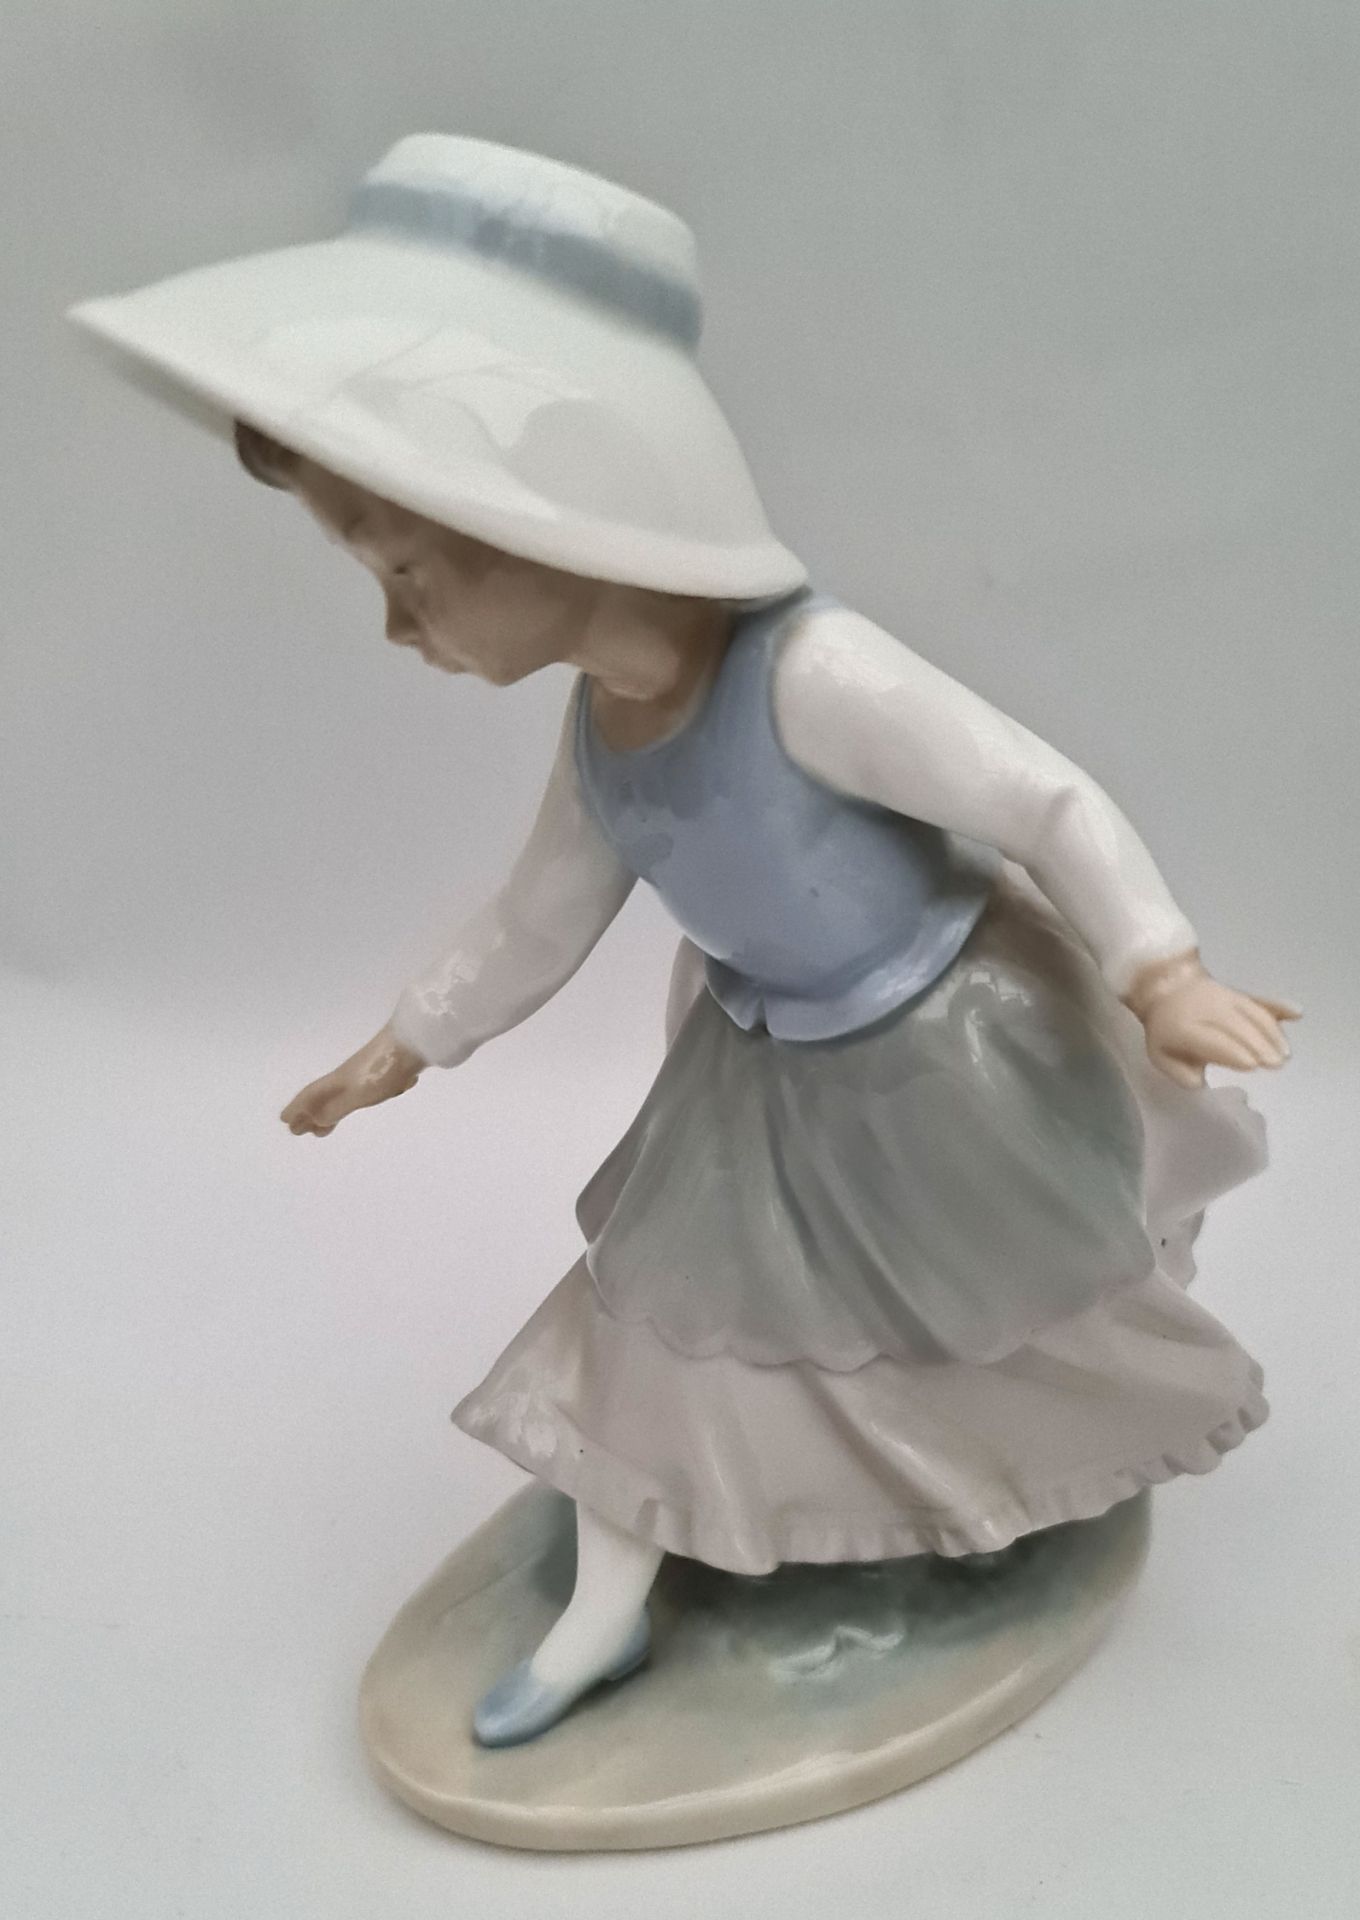 Vintage Lladro Figure 8 inches tall - Image 2 of 3